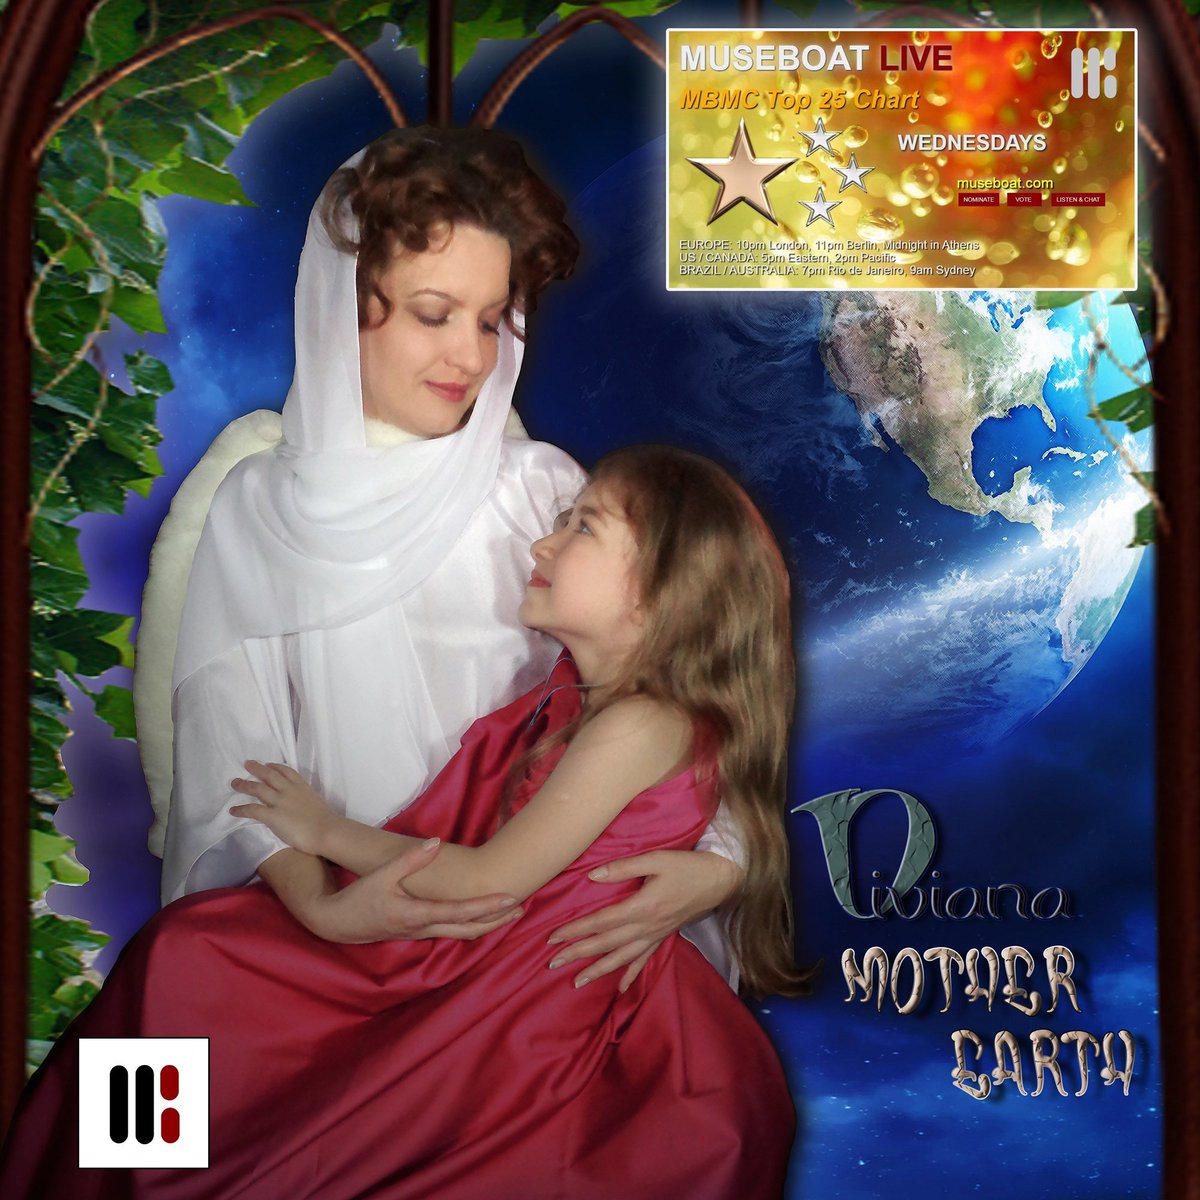 Vote for our song 'MOTHER EARTH' by @Artist_Diviana  in MBMC Top 25 Chart @museboatlive 🔥🔥🔥
The direct link to the vote page:    museboat.com/top-25-votes.h…
#diviana #motherearth #annacnova #acnmusic #acnmultimediagroup #museboatlivechannel #mbmc #top25 #chart #music2023